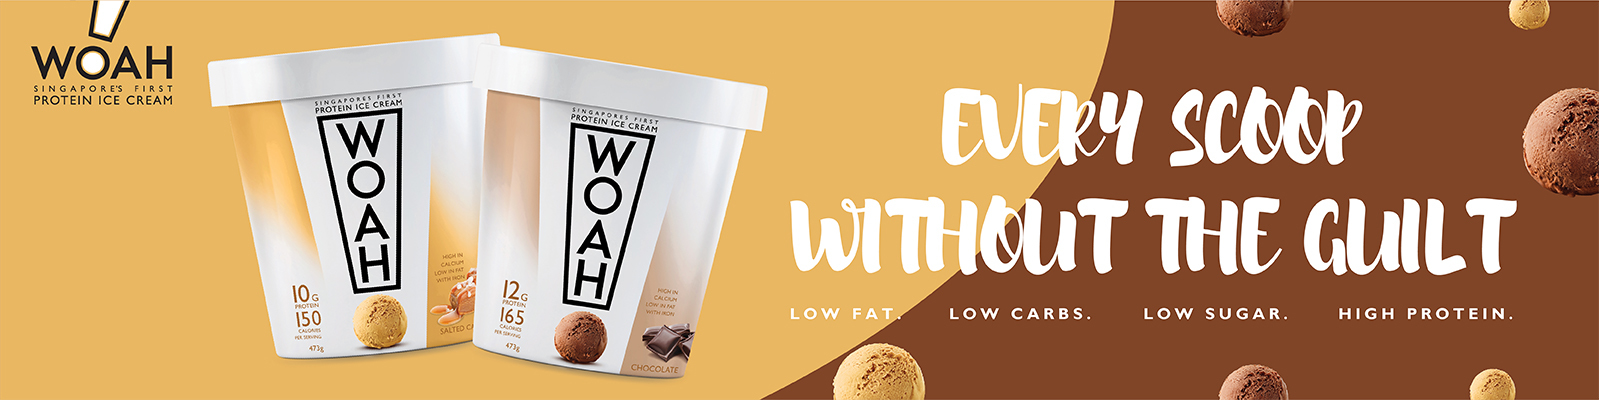 Every Scoop Without the Guilt